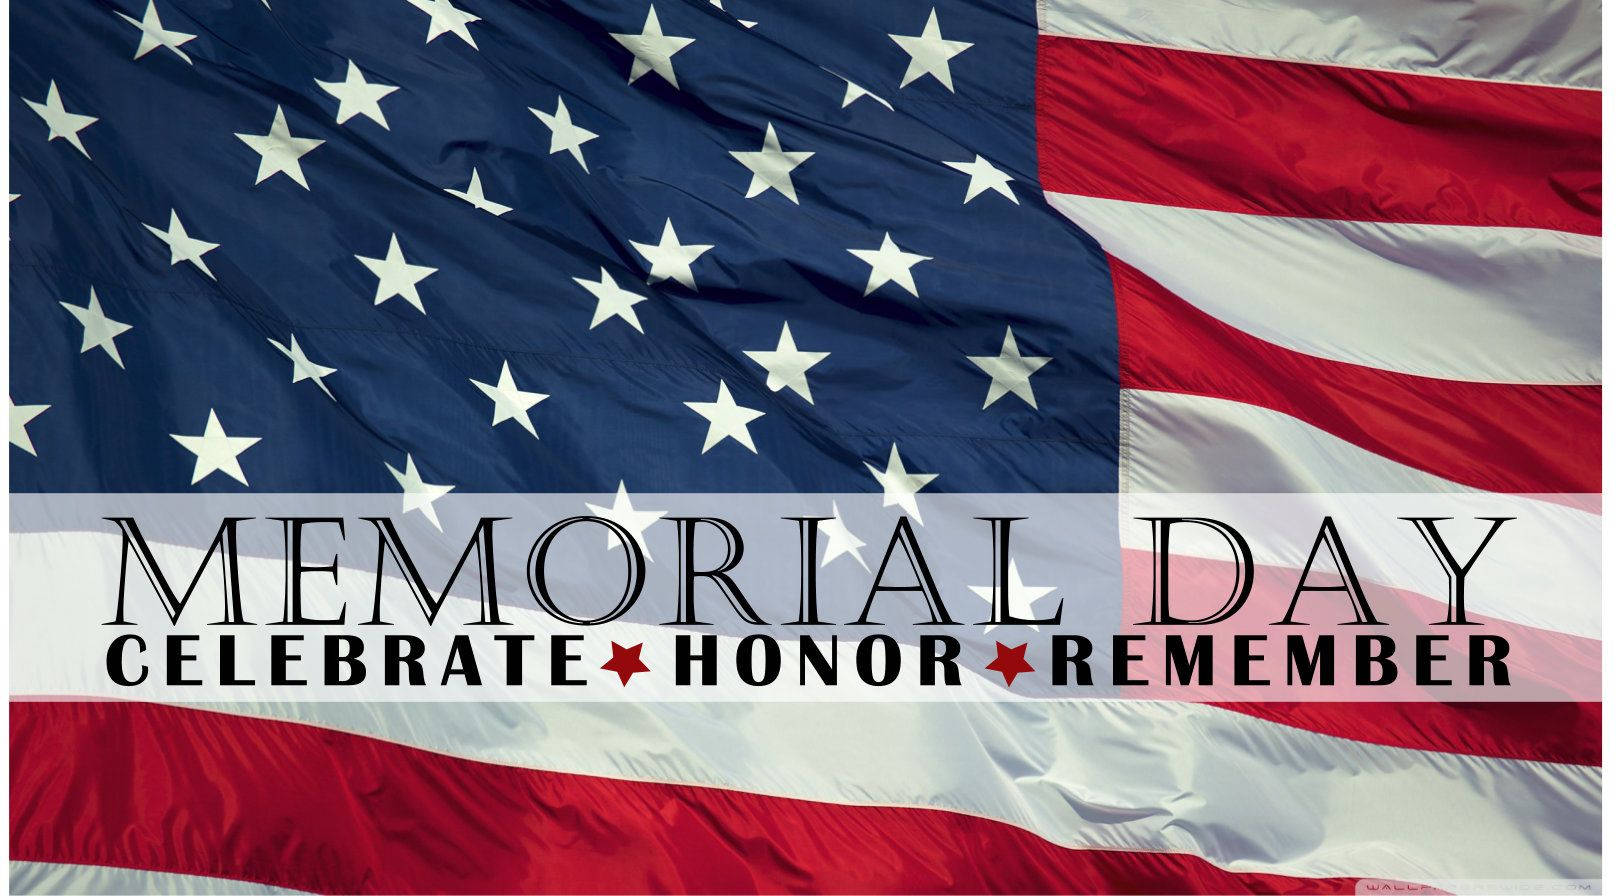 Memorial Day Flag Celebrate Honor Remember Background